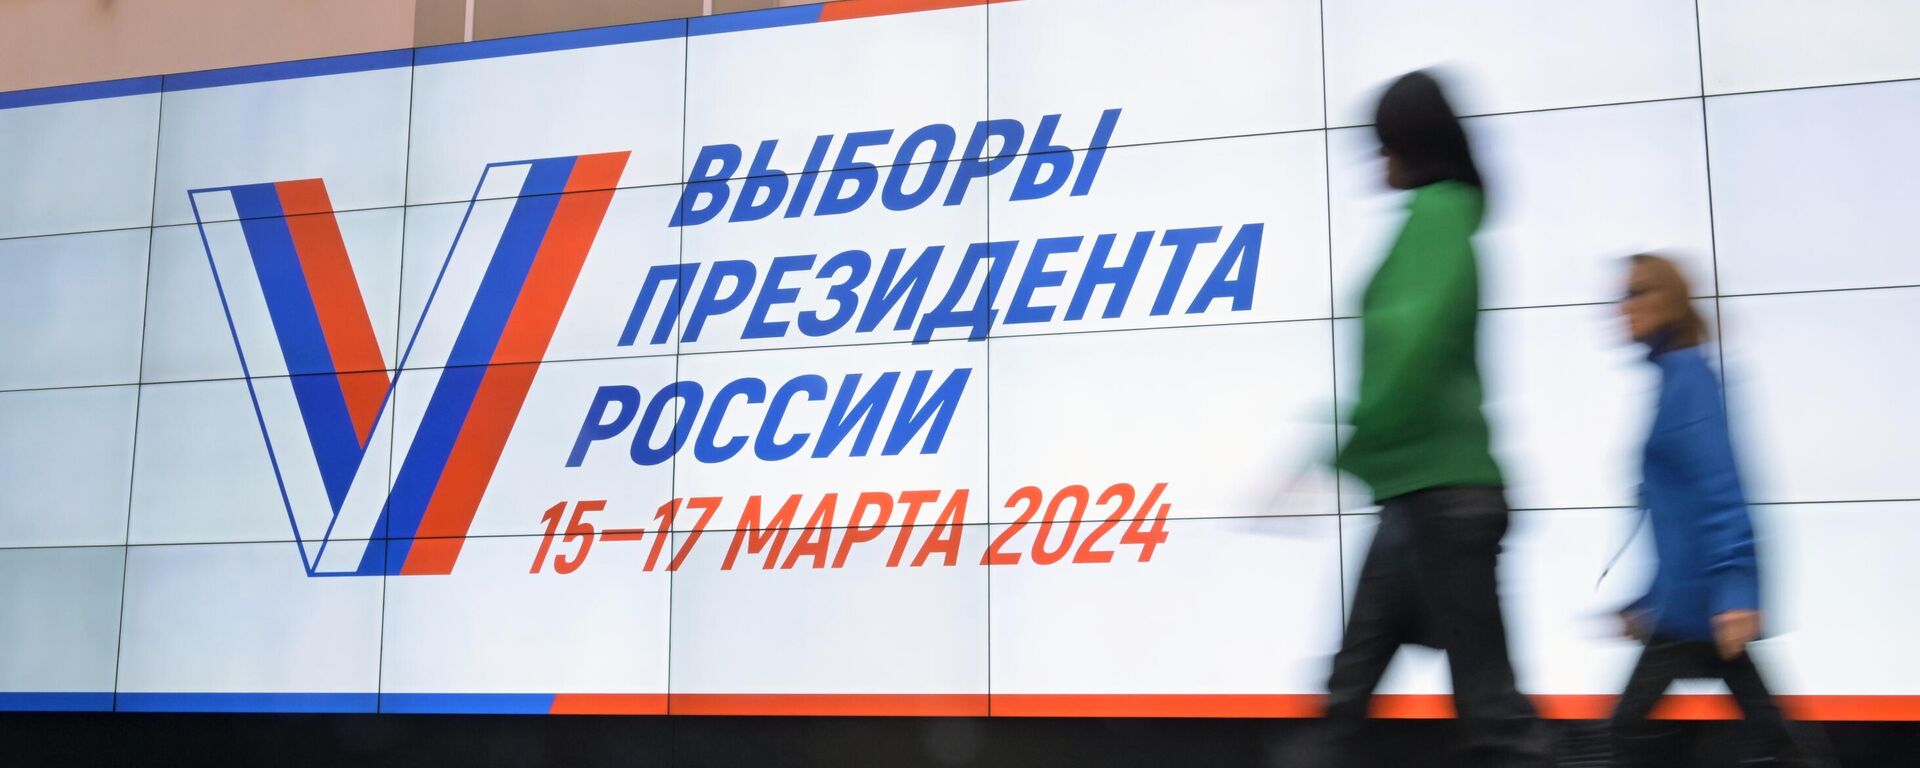 Russia is scheduled to hold its 2024 presidential election on March 15-17. - Sputnik International, 1920, 14.03.2024